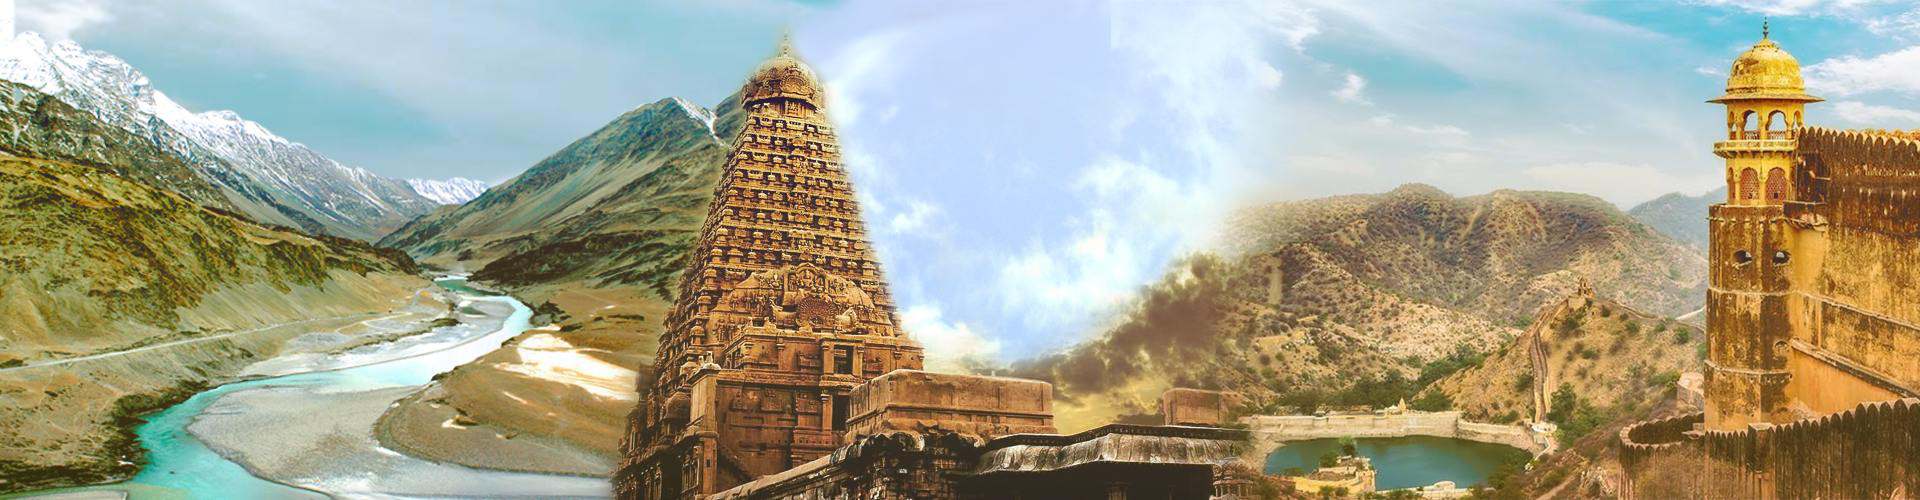 TIRTH/PILGRIMAGE PACKAGES